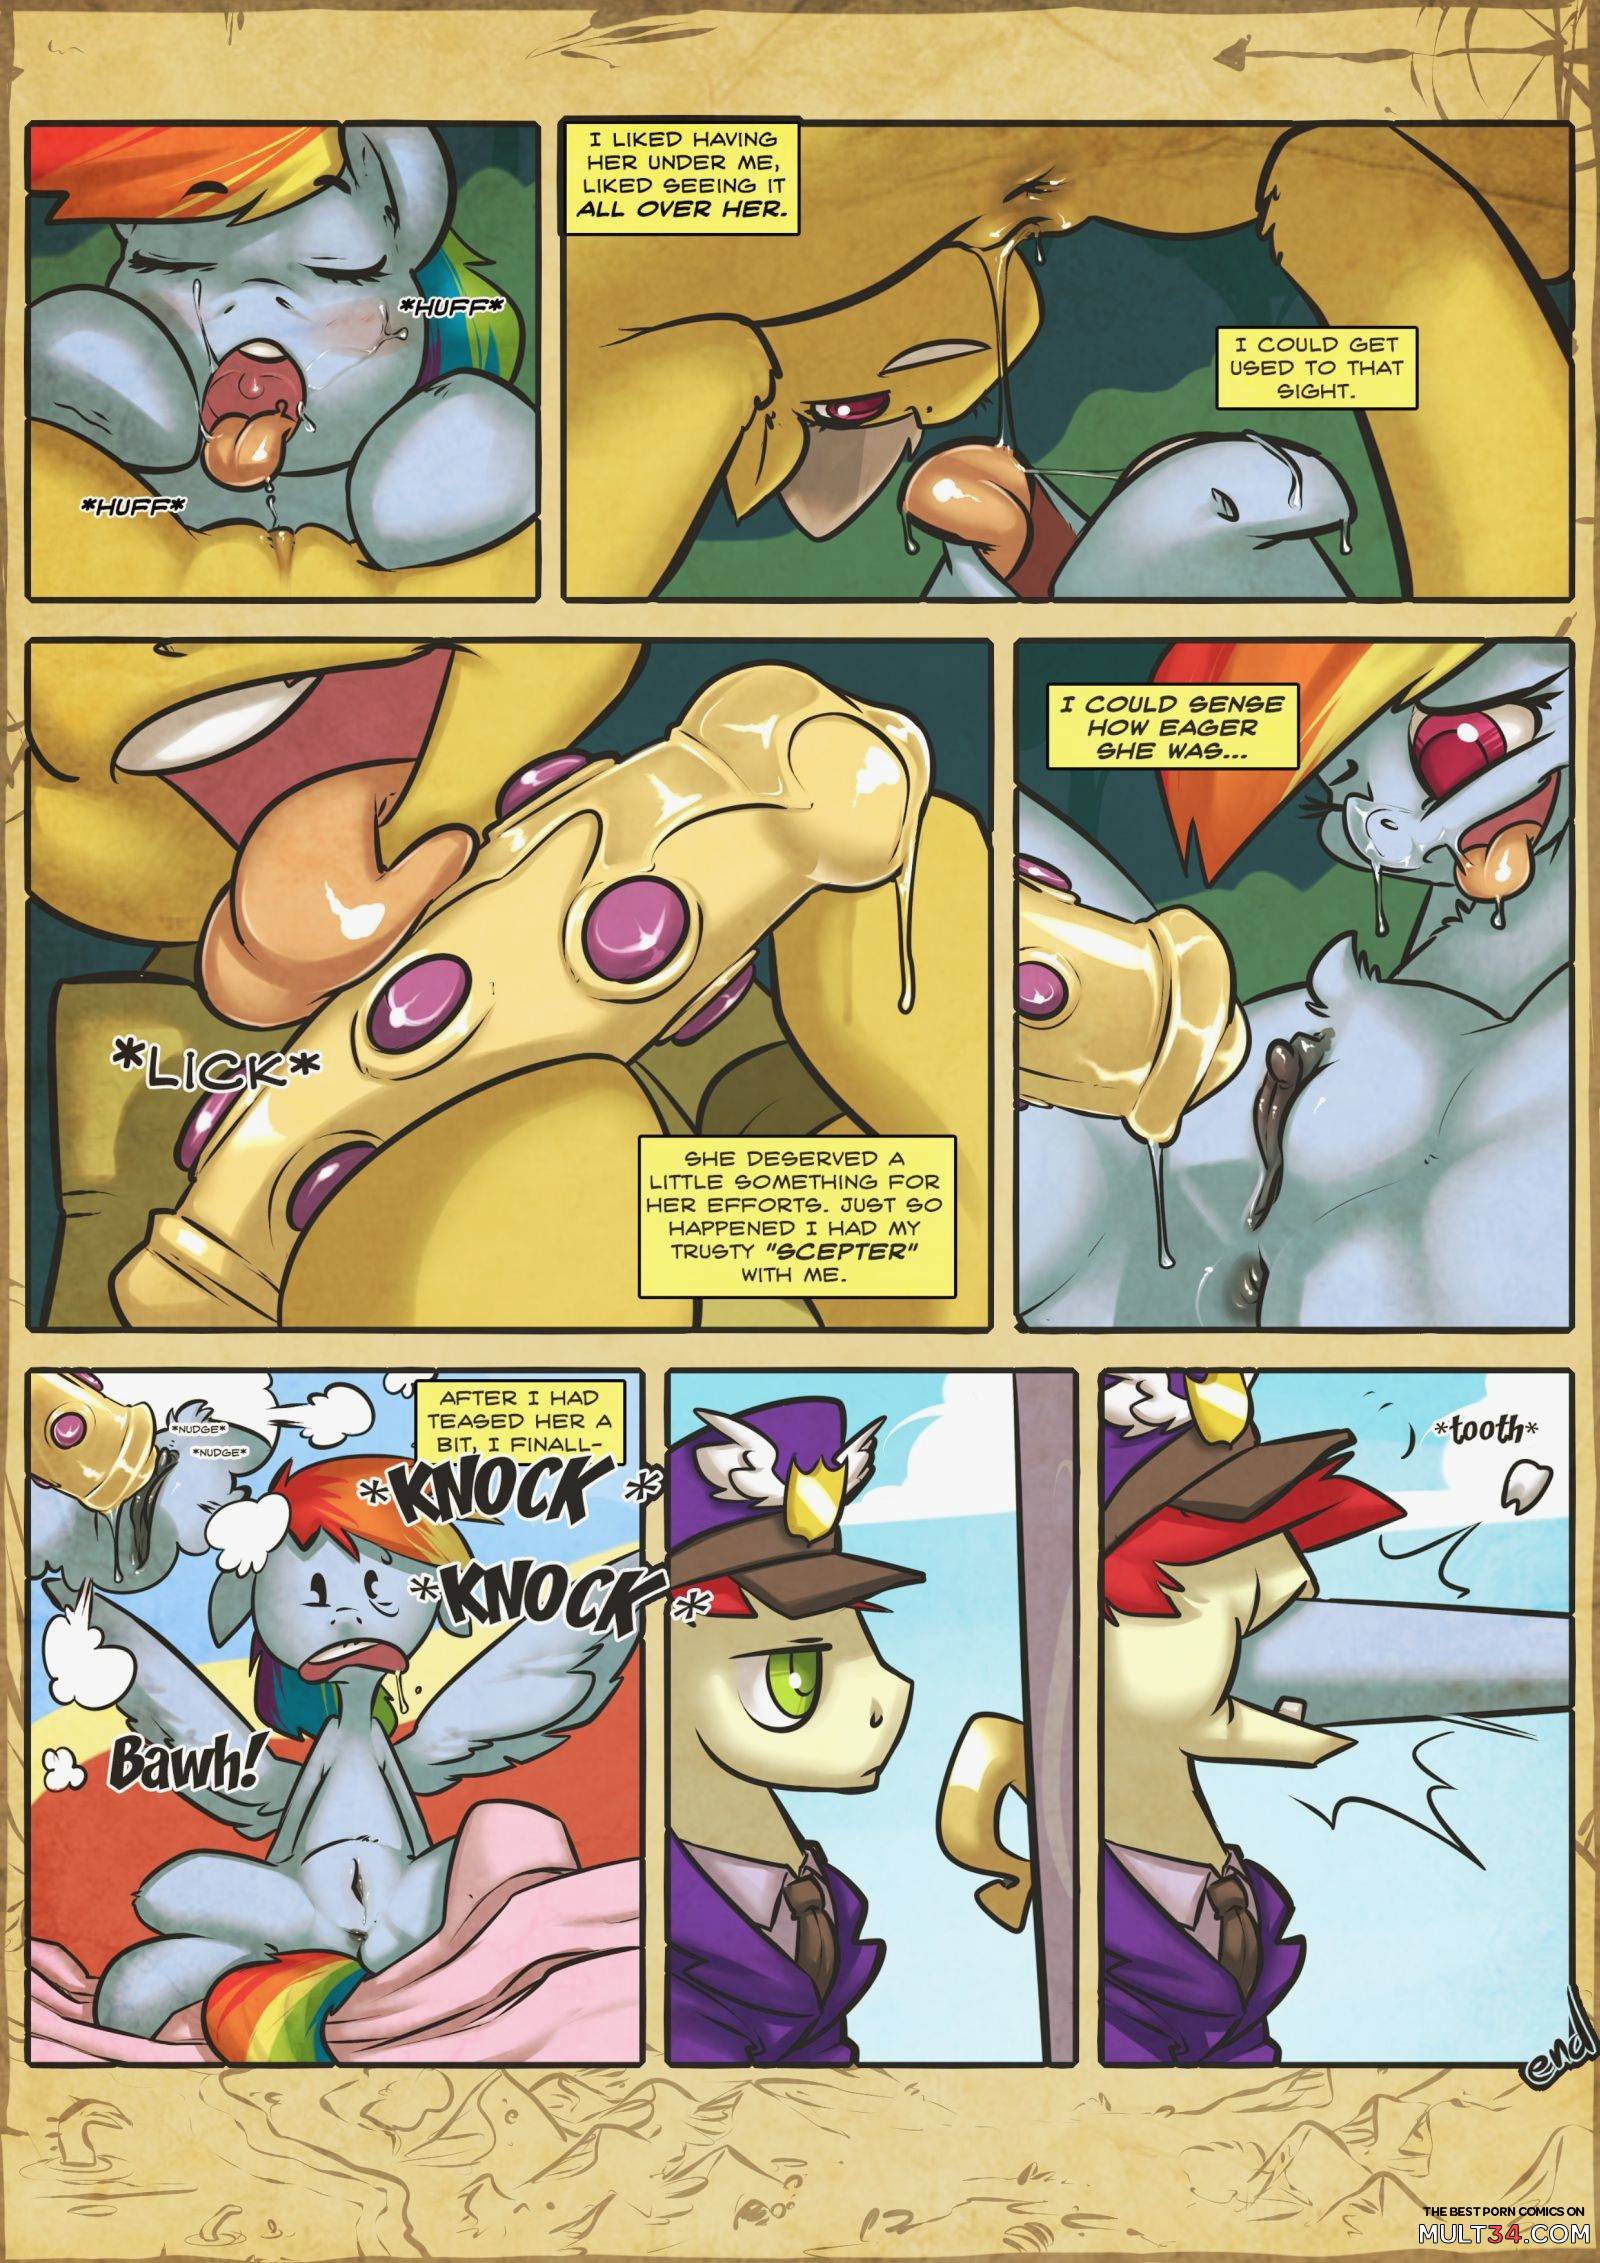 PlayPony Issue 2 page 19